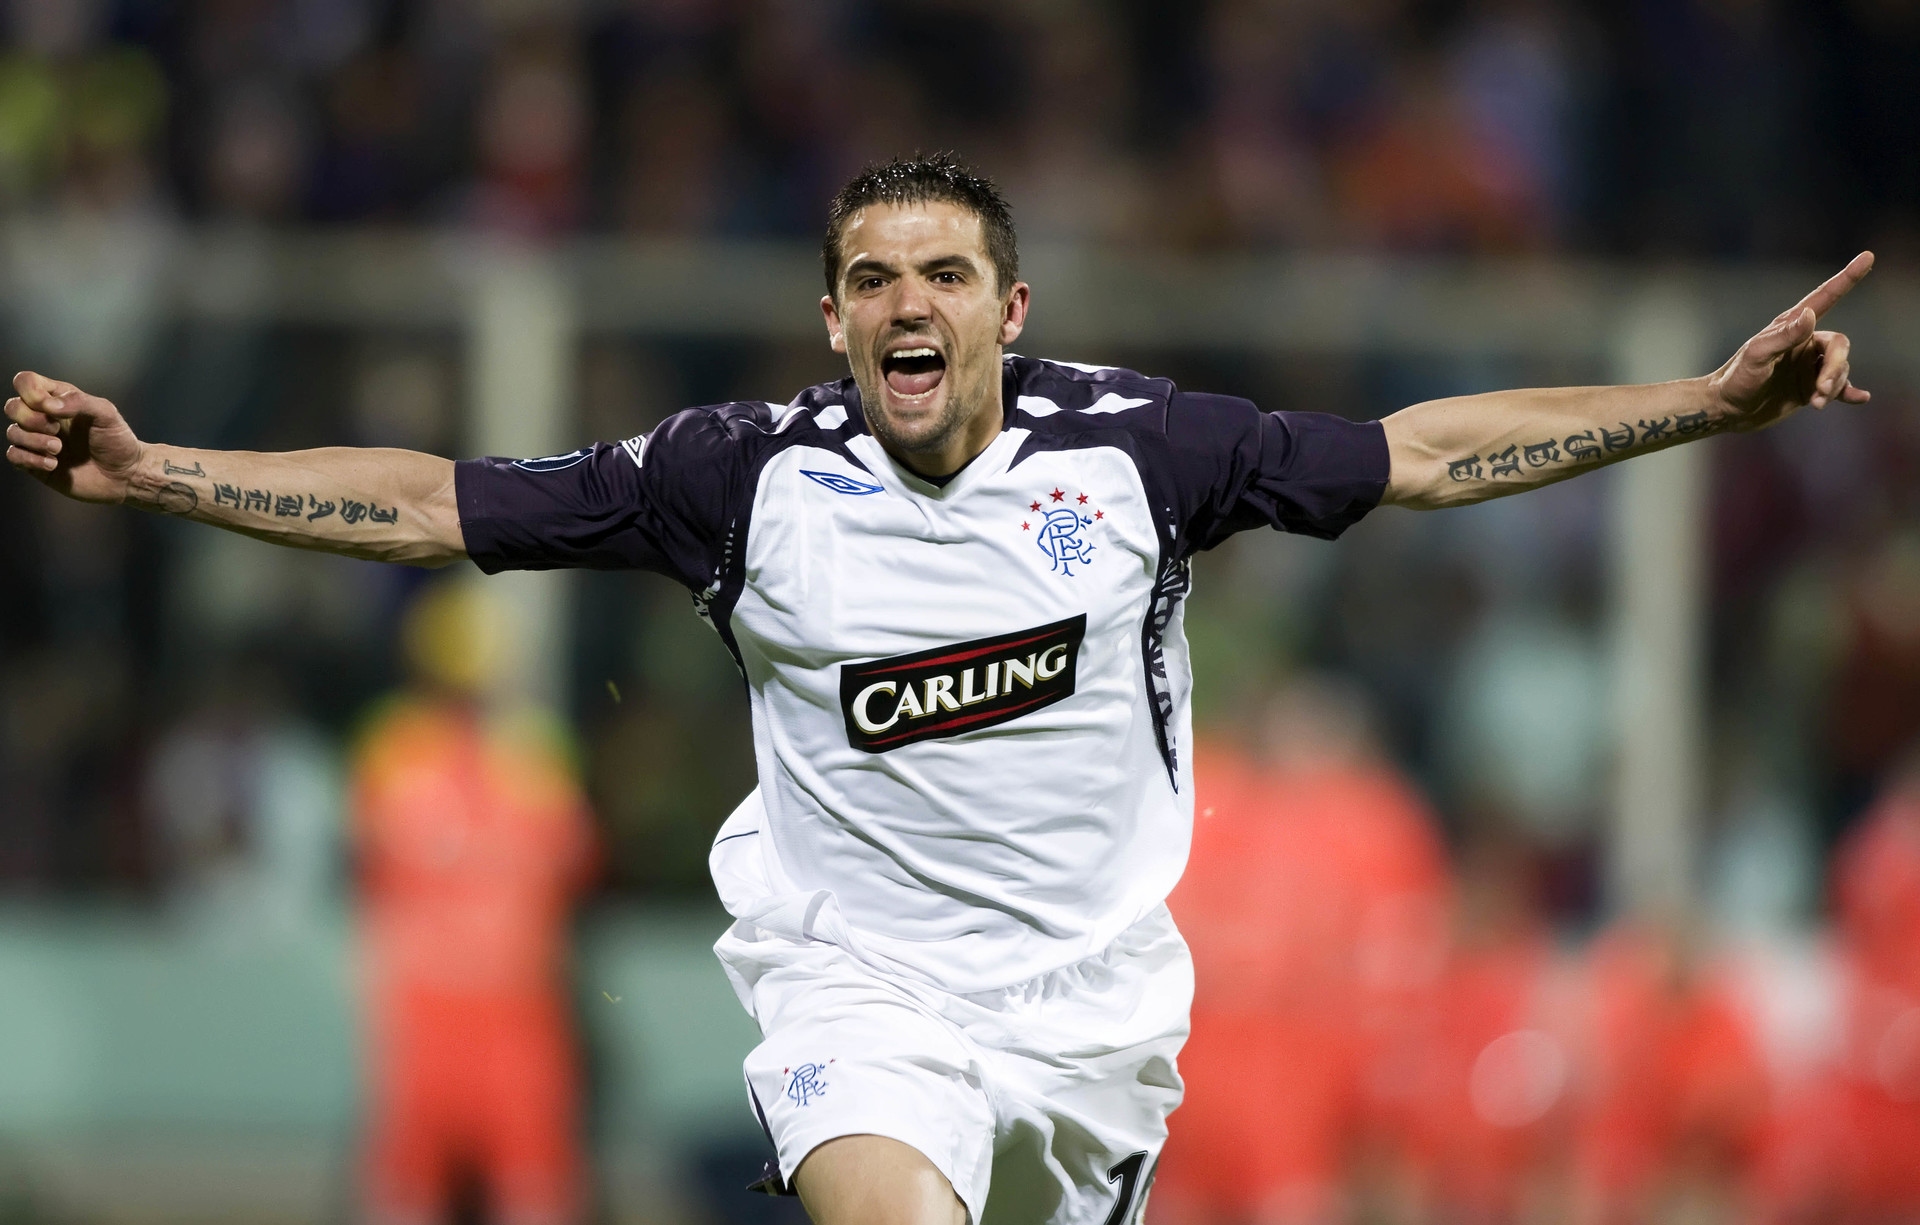 Nacho Novo netted the winning penalty in Florence.